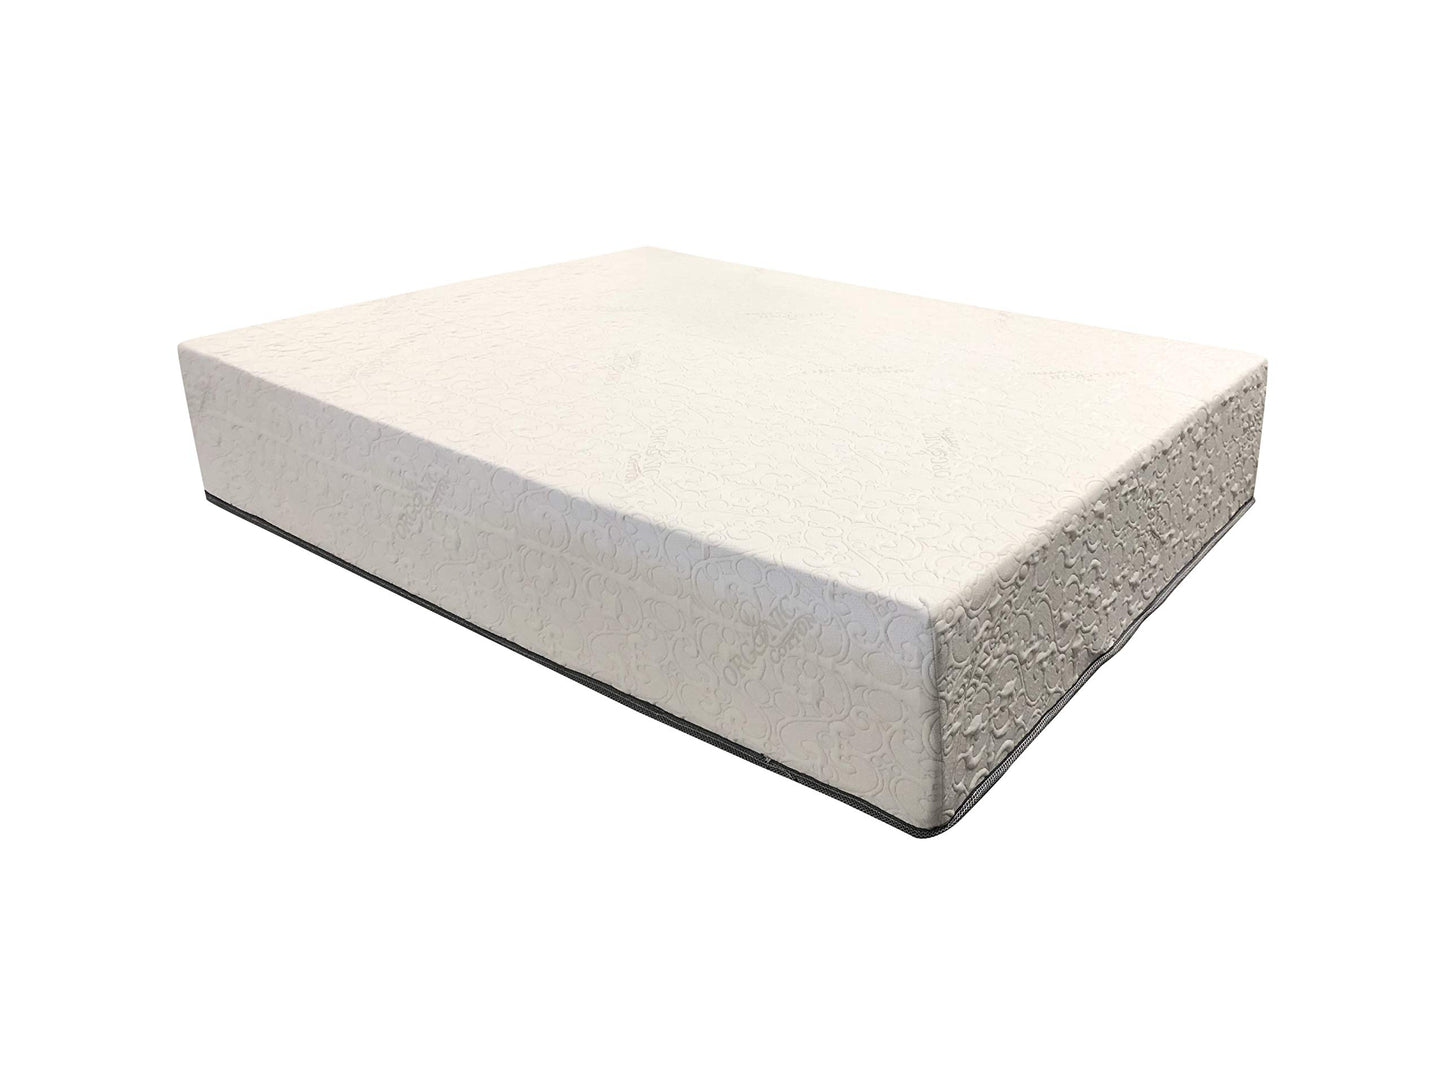 OrthoSleep Products 12" Double Layer Memory Foam Mattress, Olympic Queen